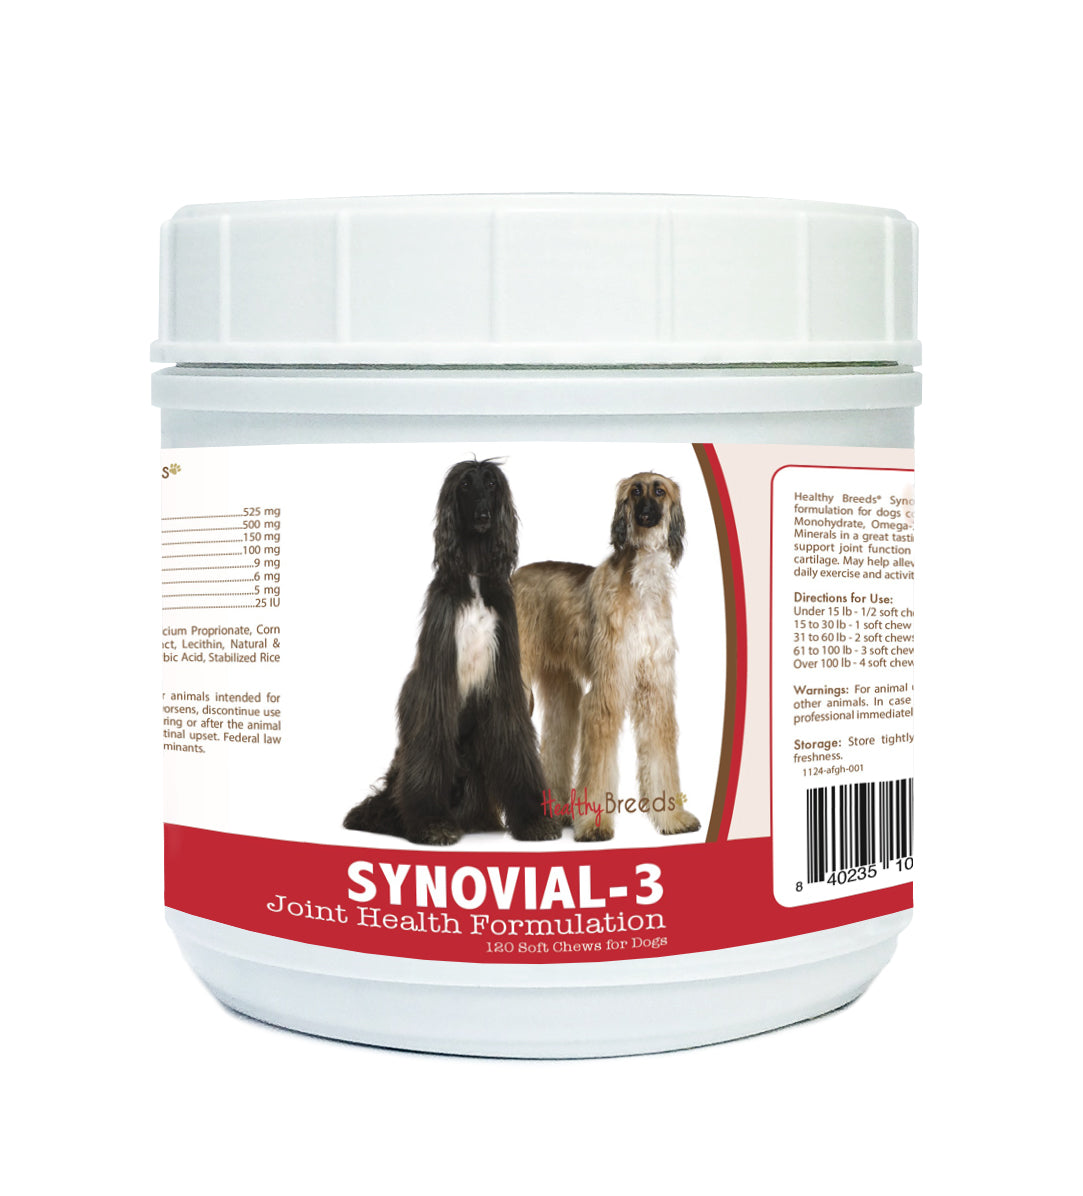 Afghan Hound Synovial-3 Joint Health Formulation Soft Chews 120 Count